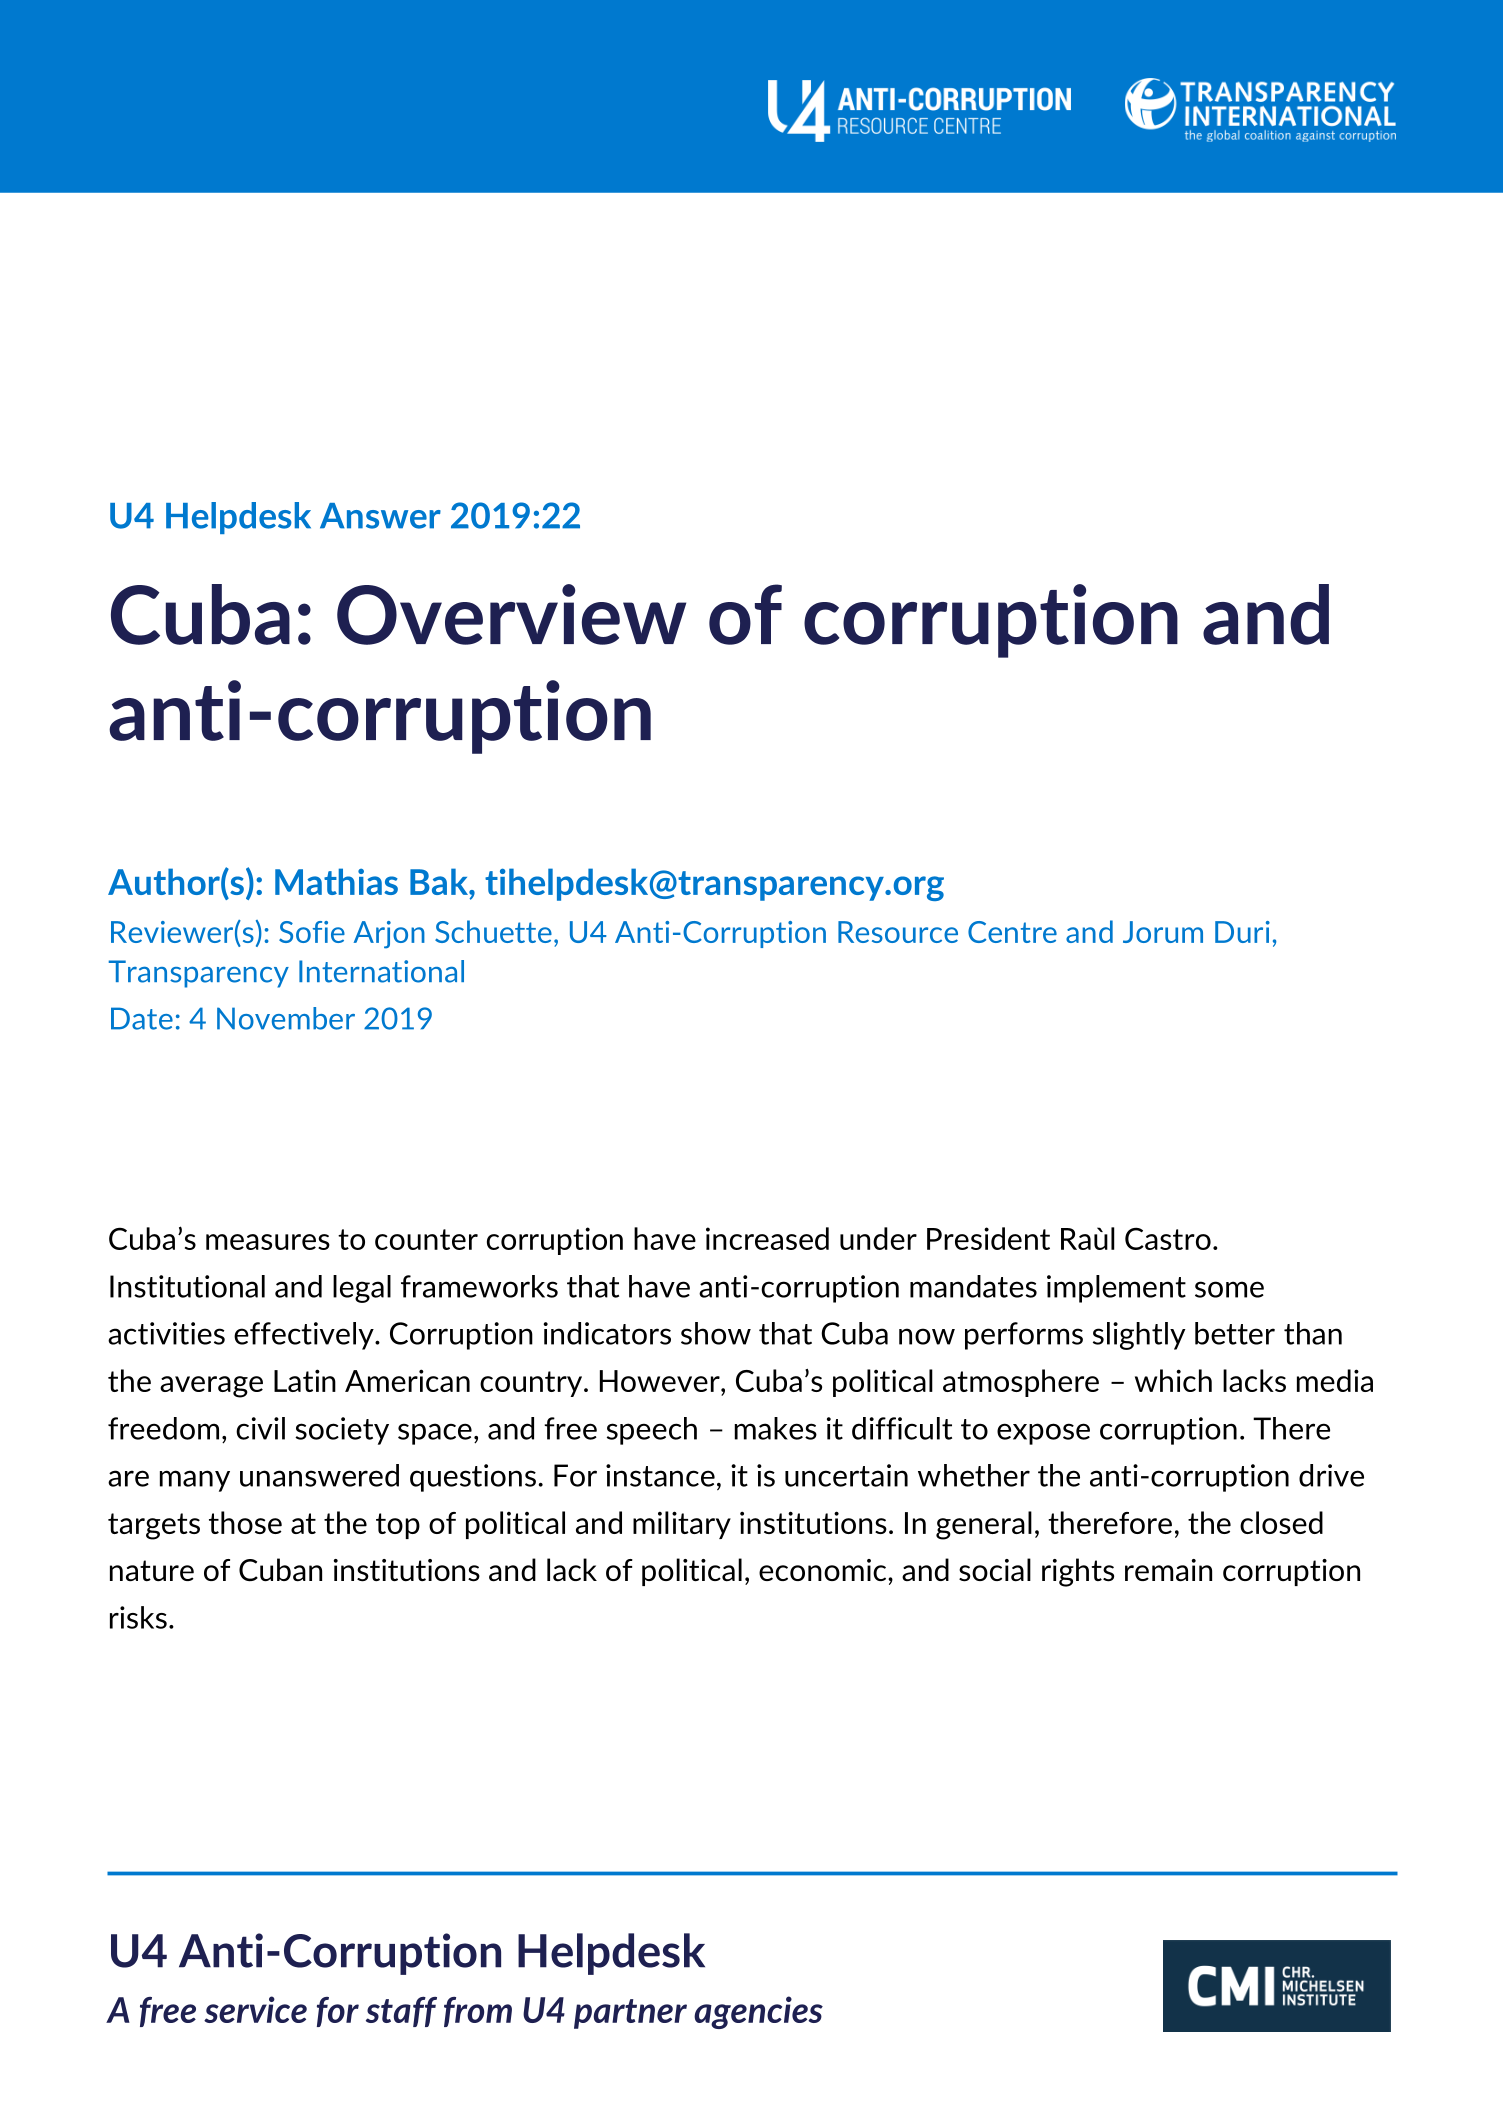 Cuba: Overview of corruption and anti-corruption